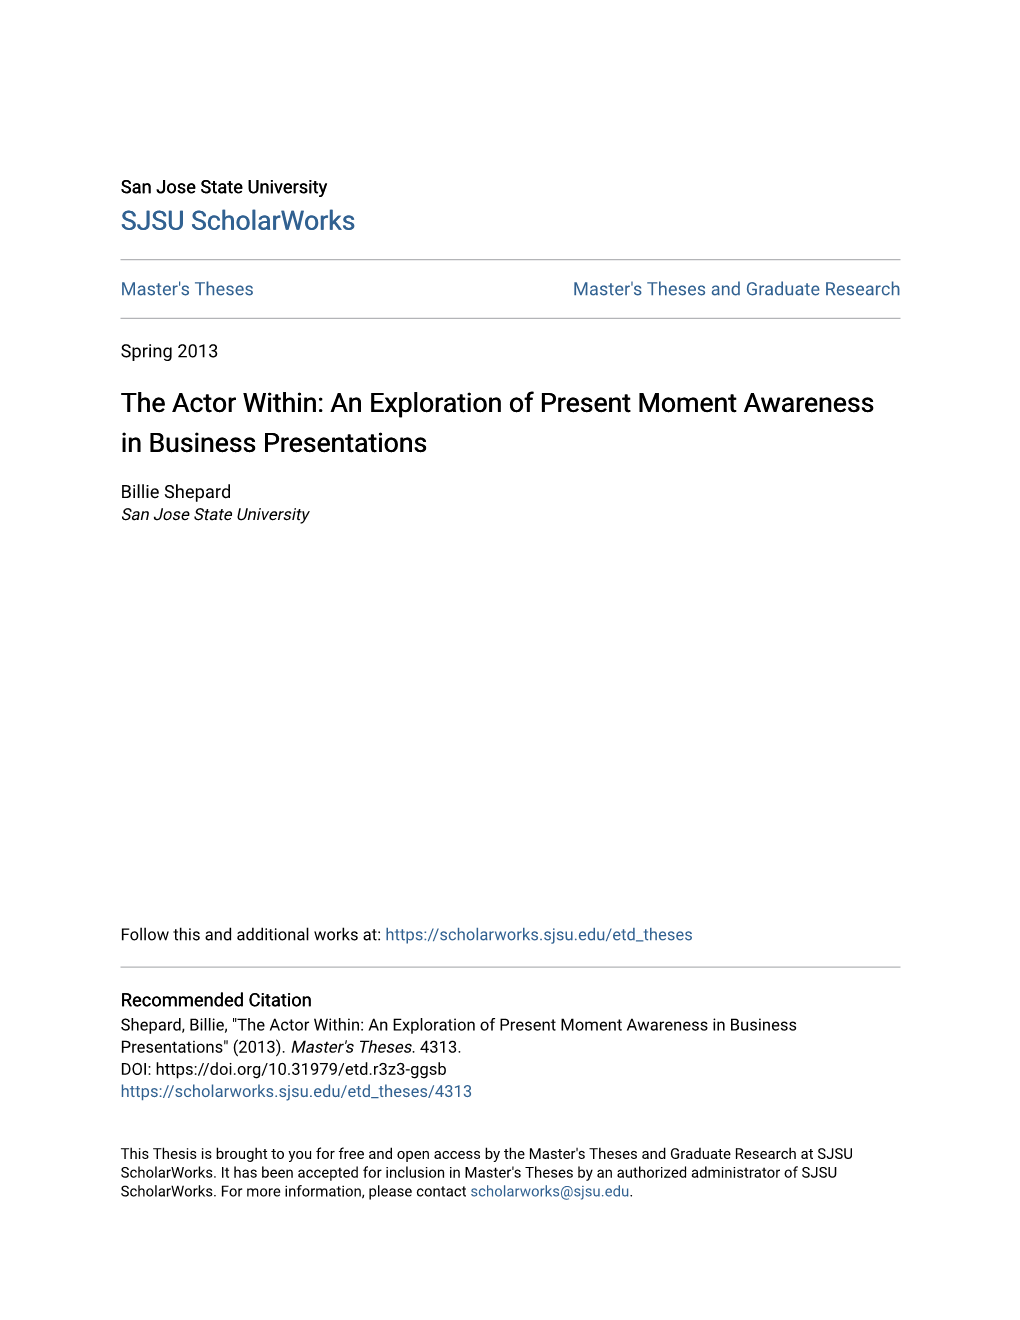 The Actor Within: an Exploration of Present Moment Awareness in Business Presentations